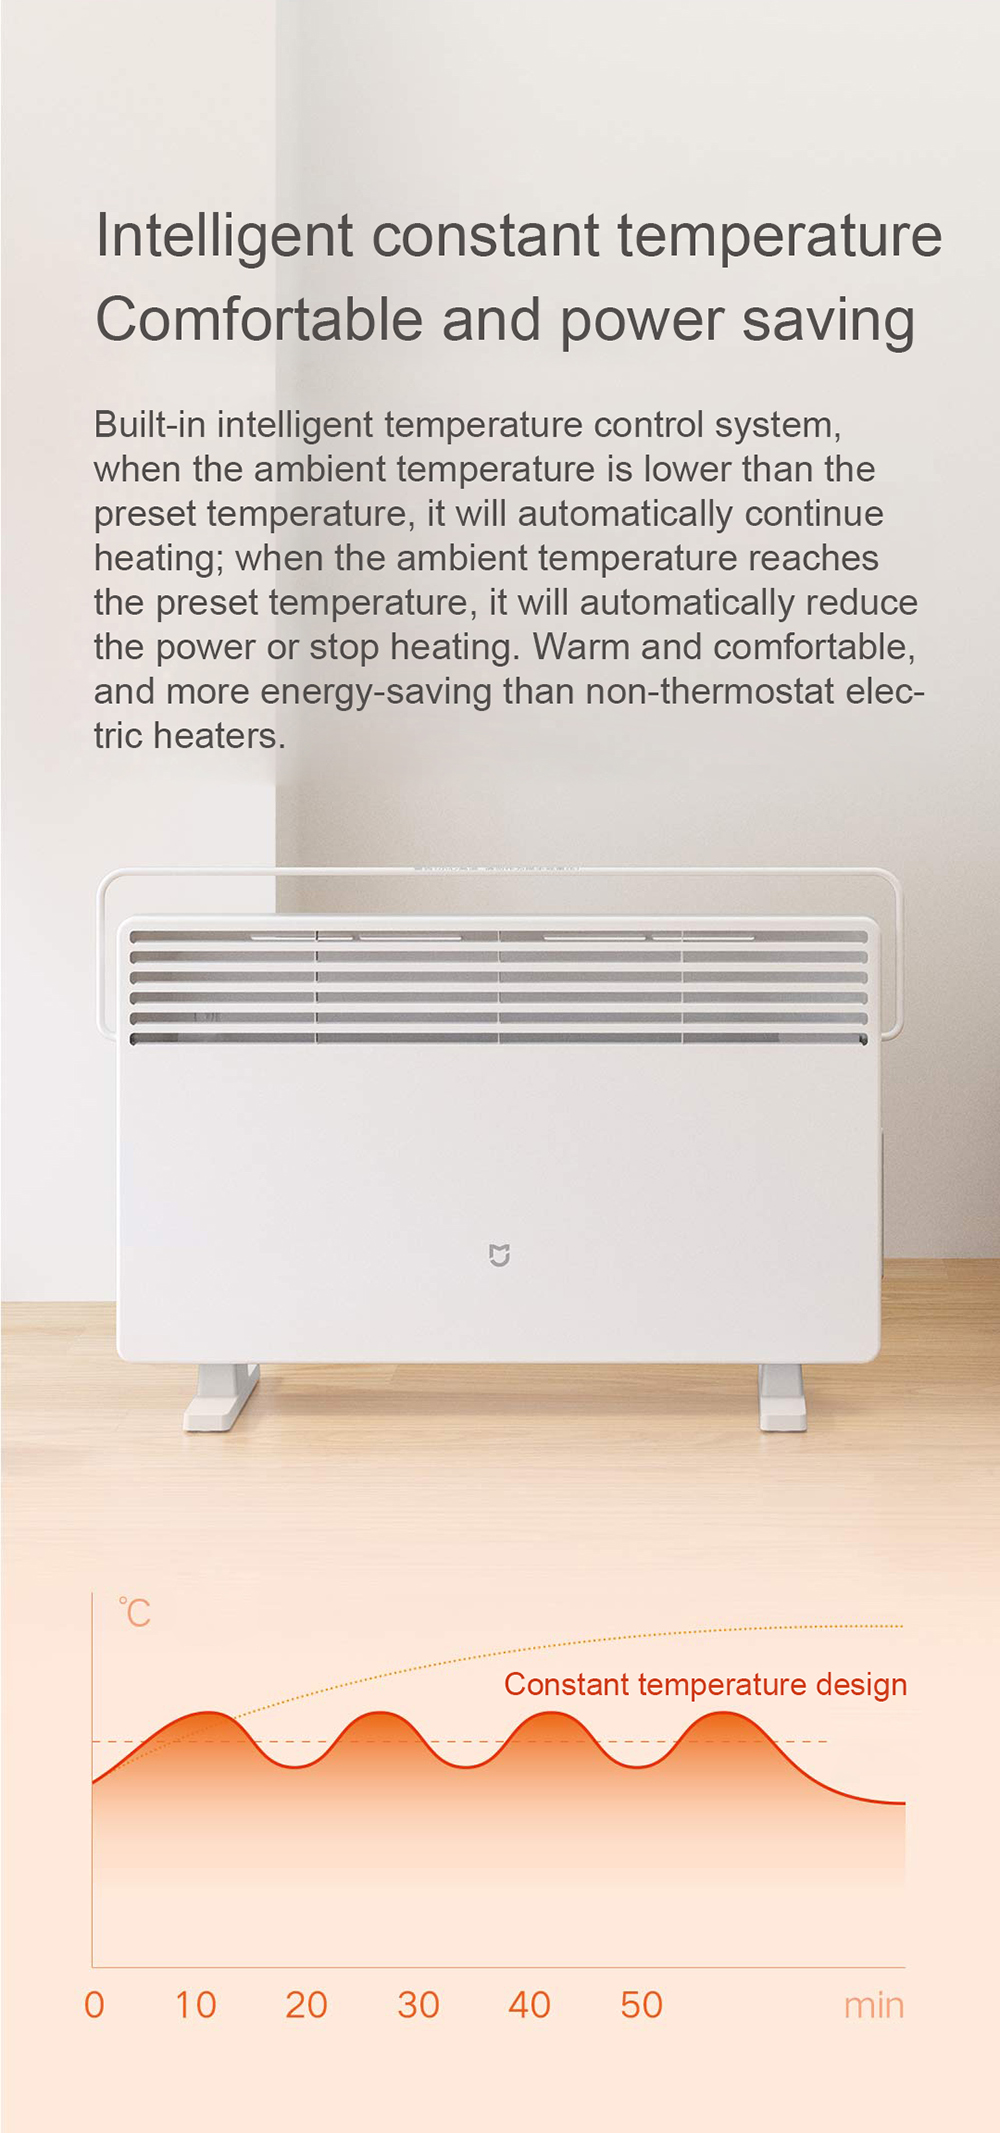 Intelligent constant temperature confortable and power saving